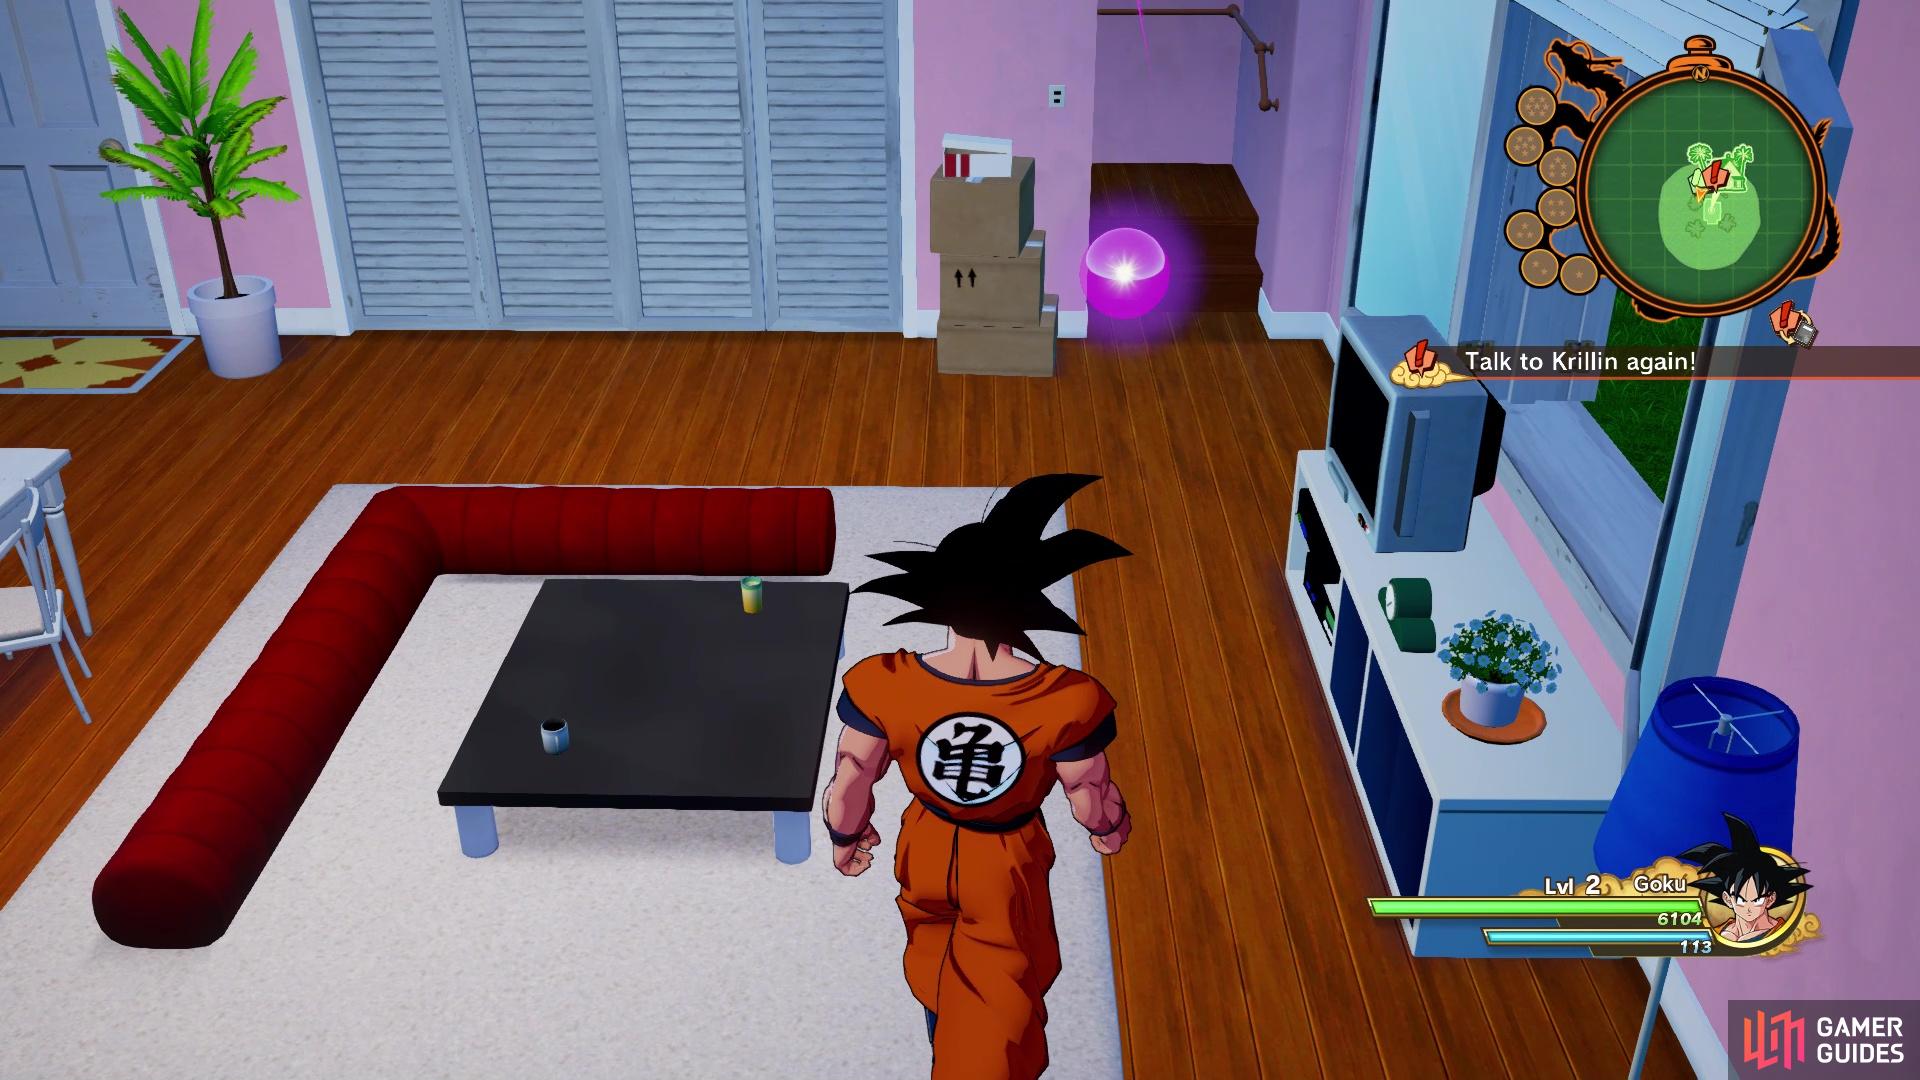 You can find an item inside Roshi's house from the purple orb